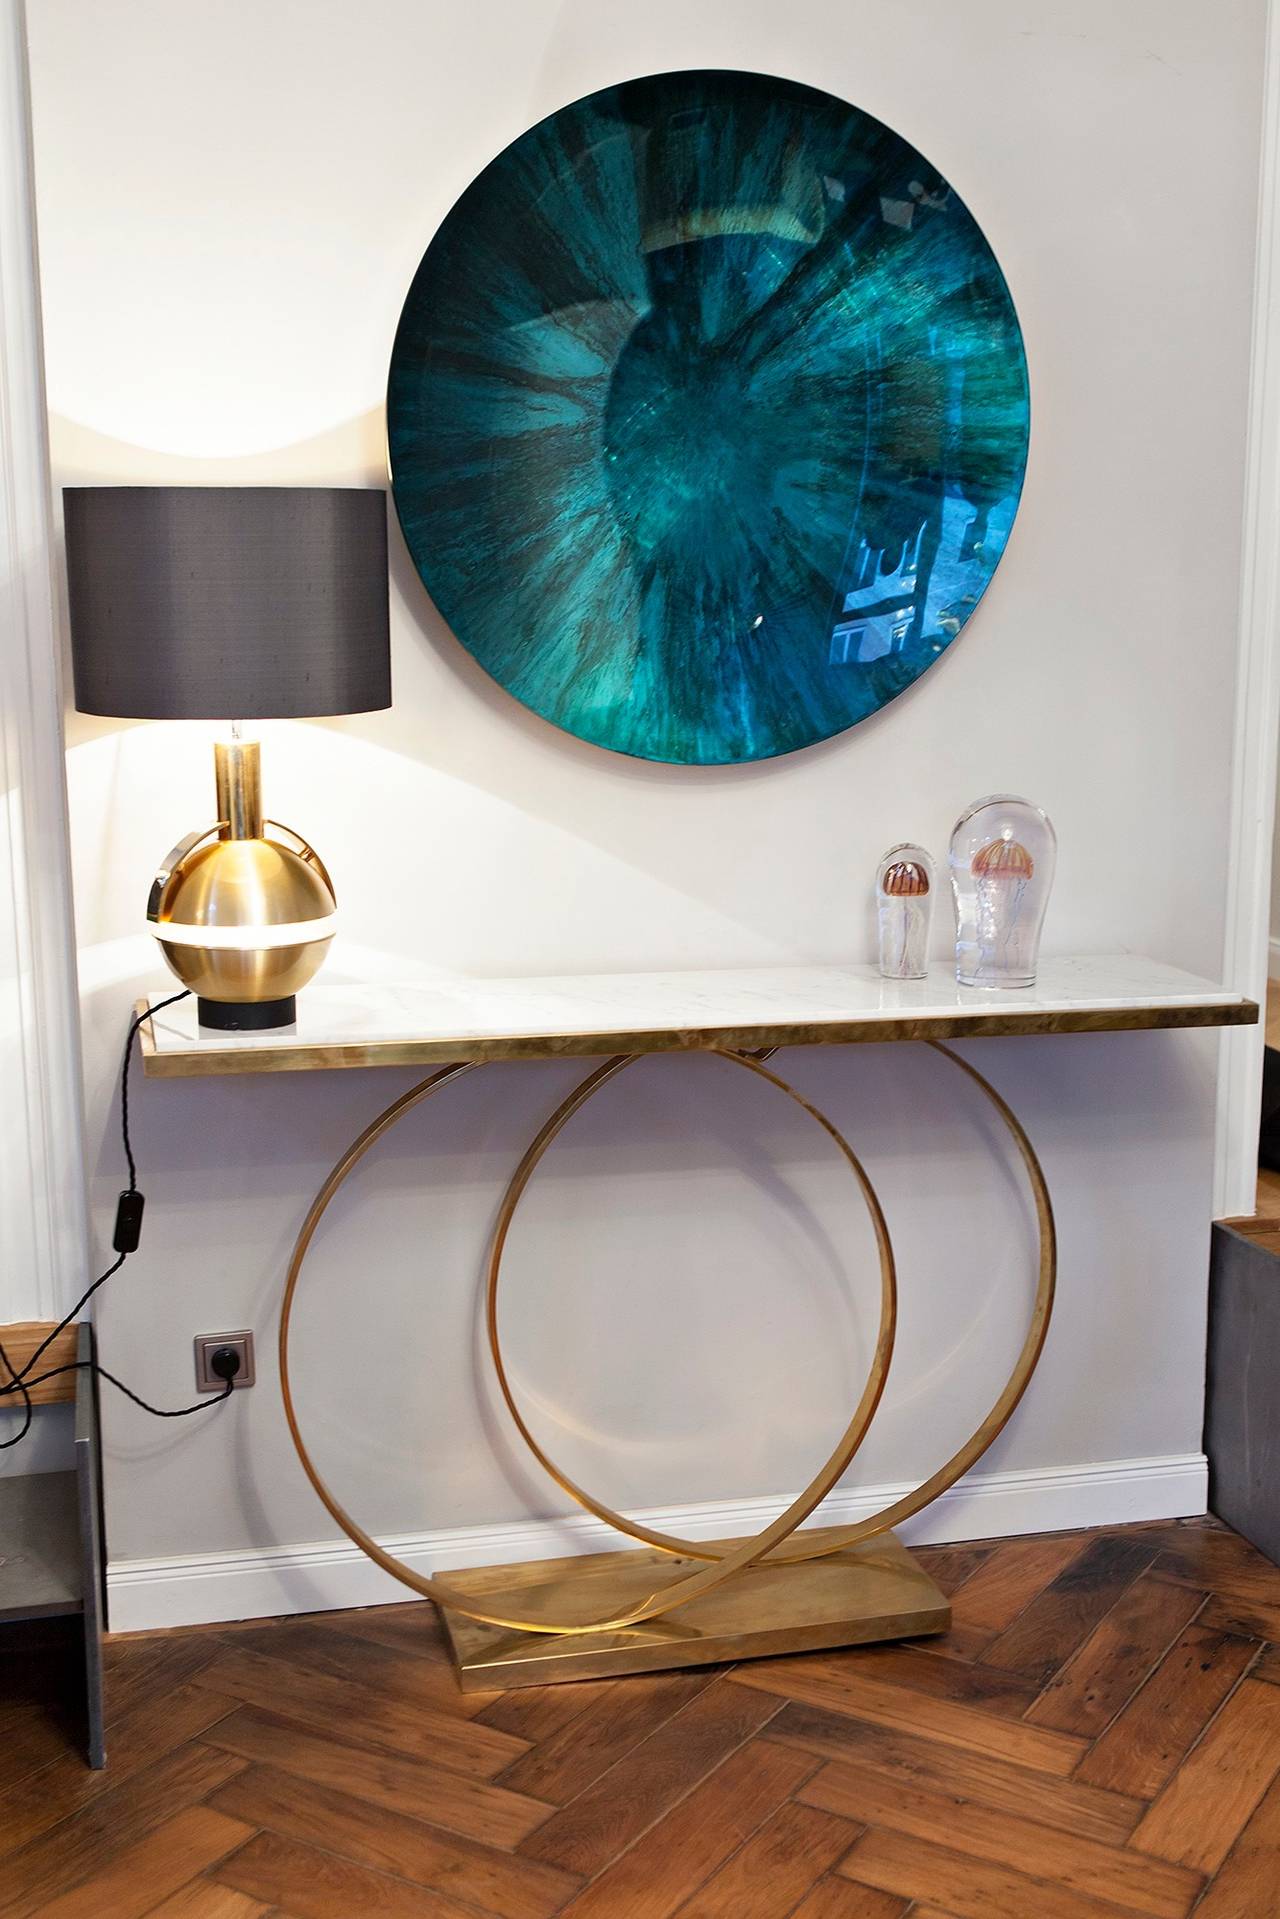 Amazing contemporary unique convex mirror Miroir Bleu in oxyde mirror glass by Christophe Gaignon, France, 2014.
Handmade glass mirror by the artist.
Diameter 90 cm, depth 12 cm.
Brass suspension, signed by C. Gaignon on the backside.